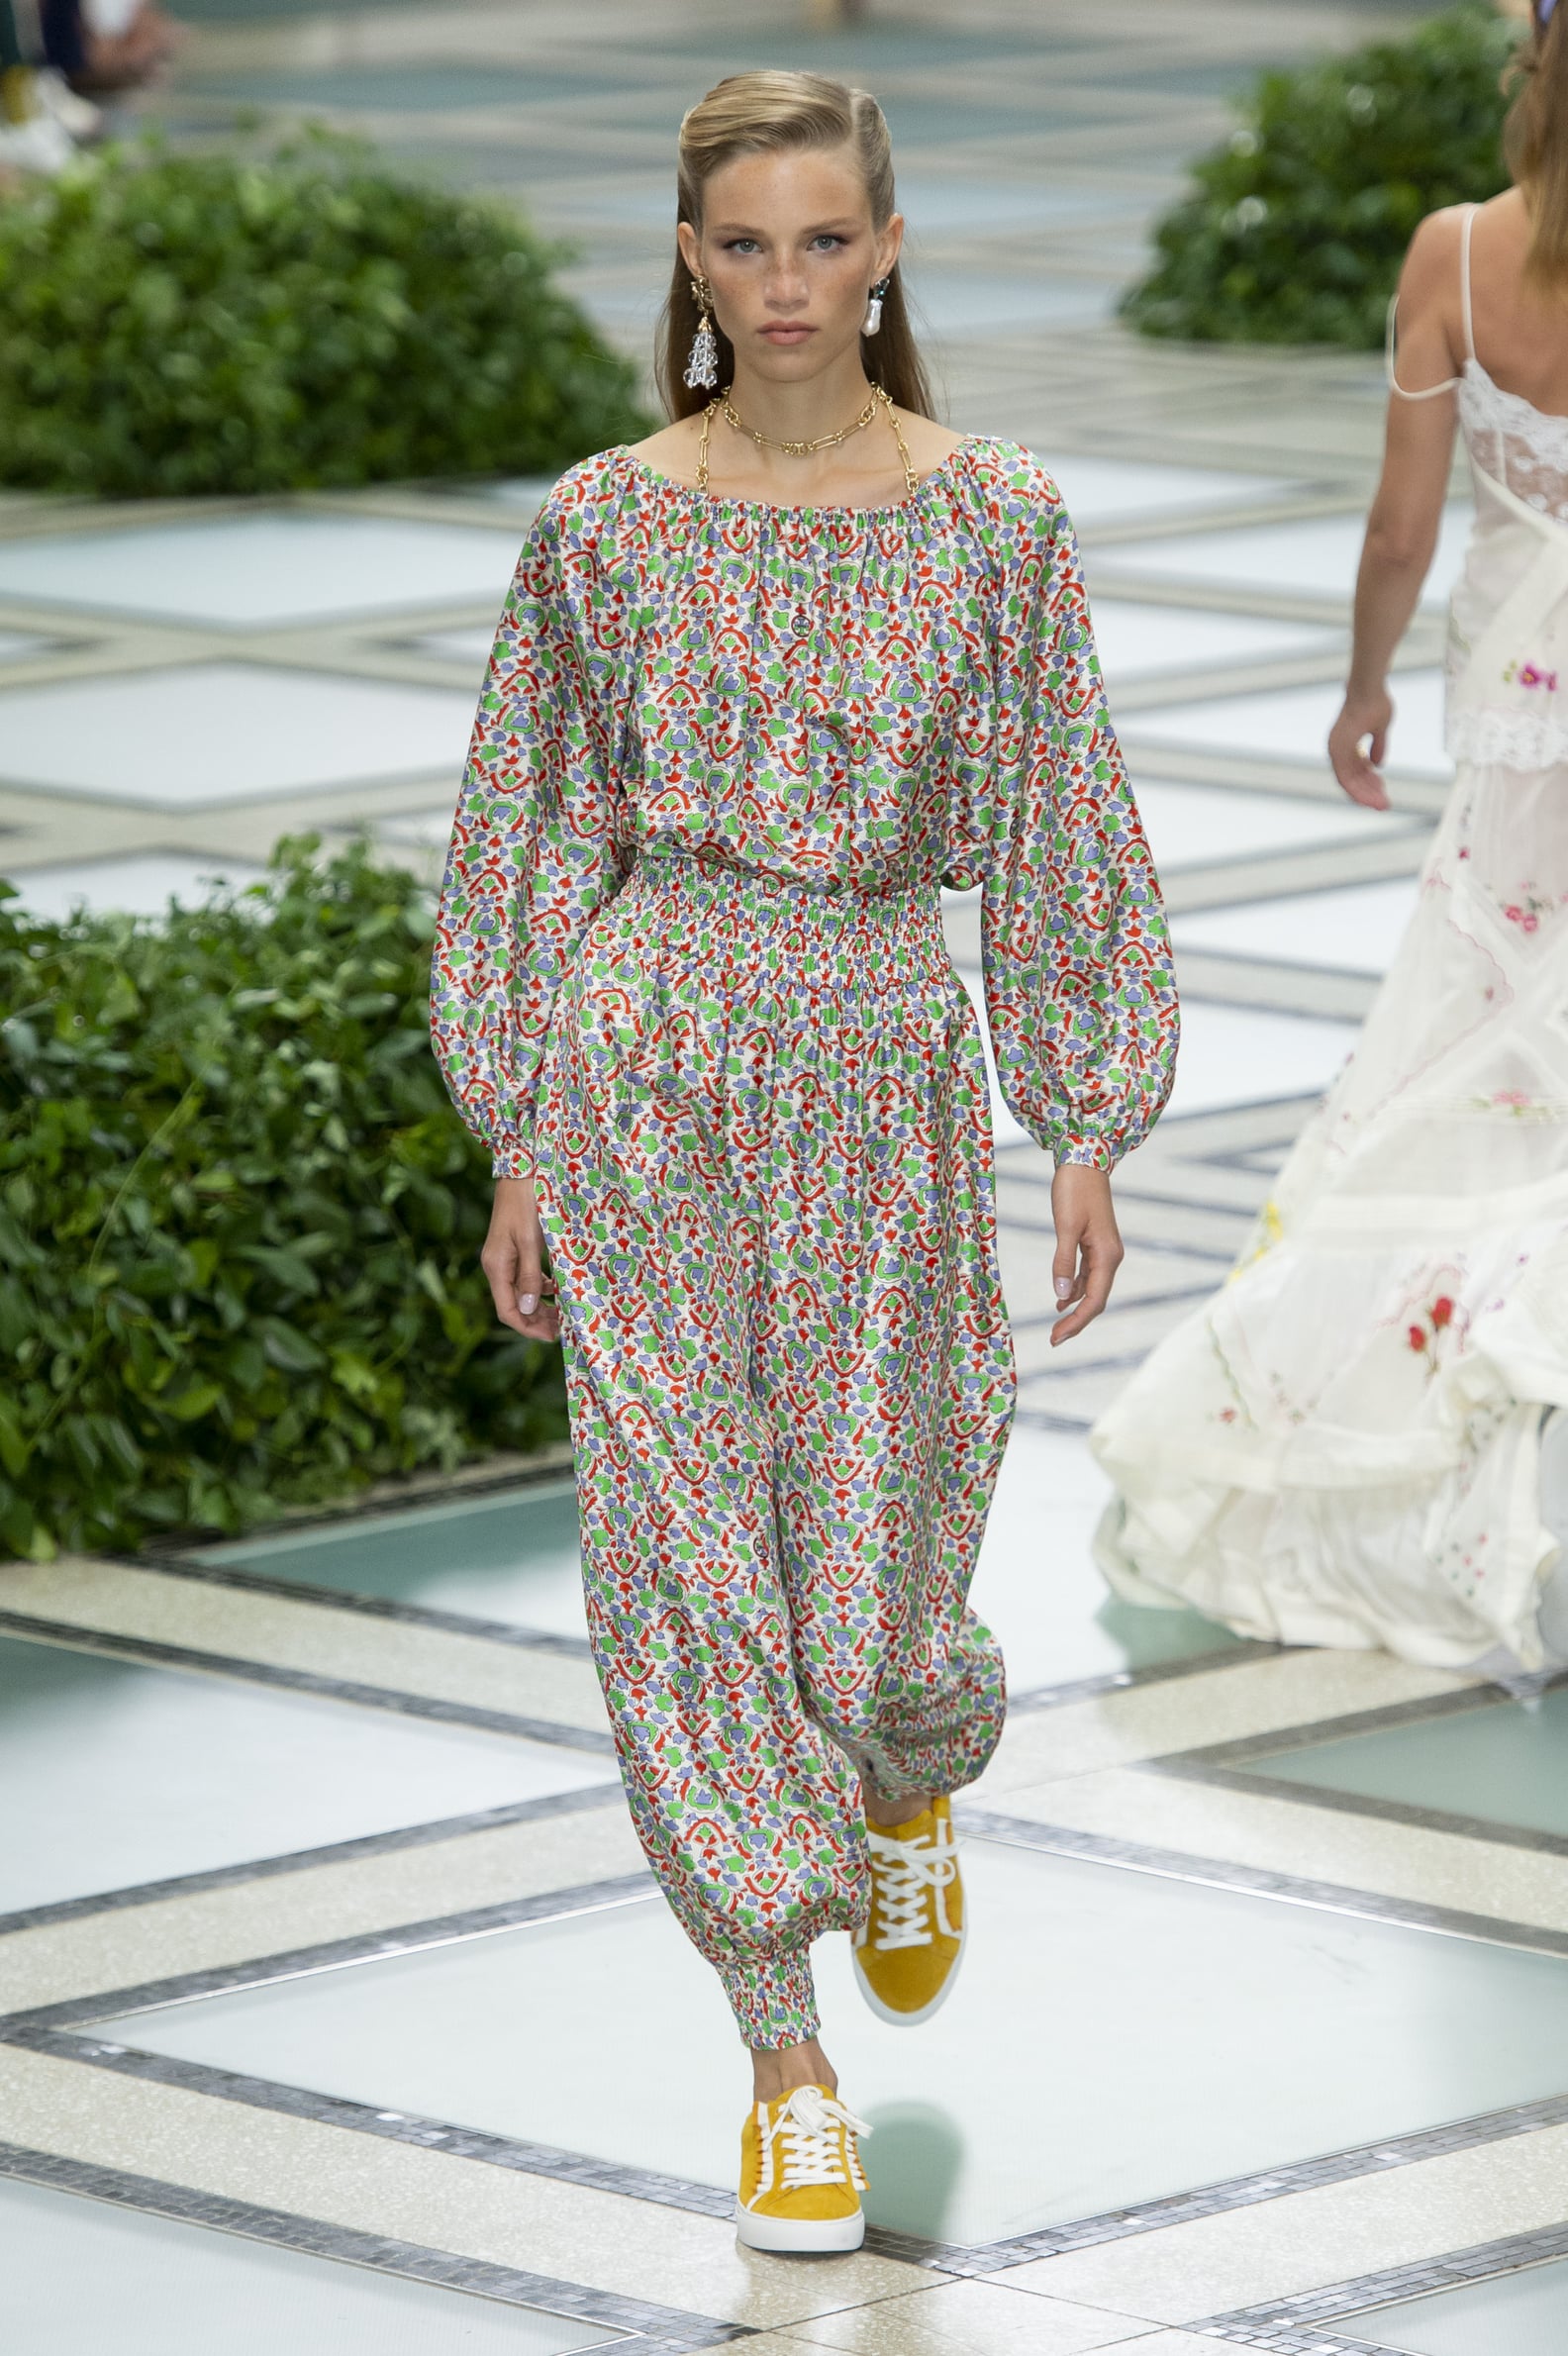 Tory Burch Spring 2020 Show Pictures | POPSUGAR Fashion